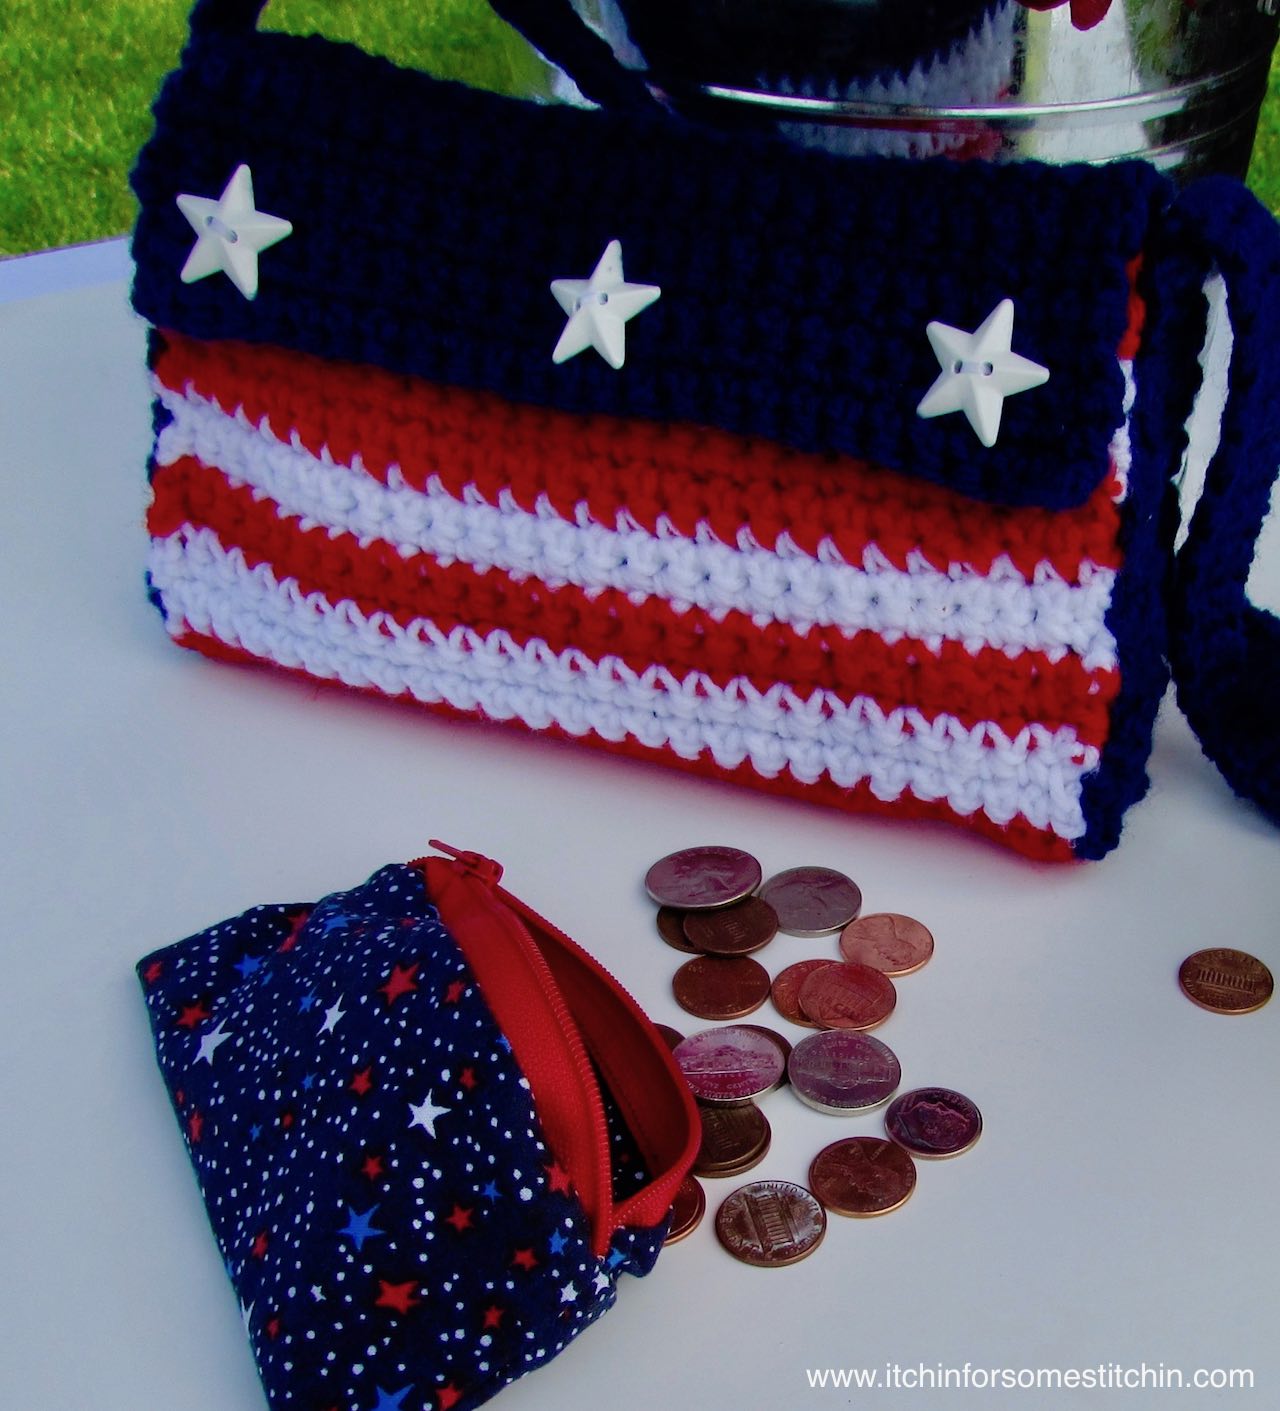 Red, White, and Blue Zipper Pouch and Crochet 4th of July American Flag Purse by www.itchinforsomestitchin.com